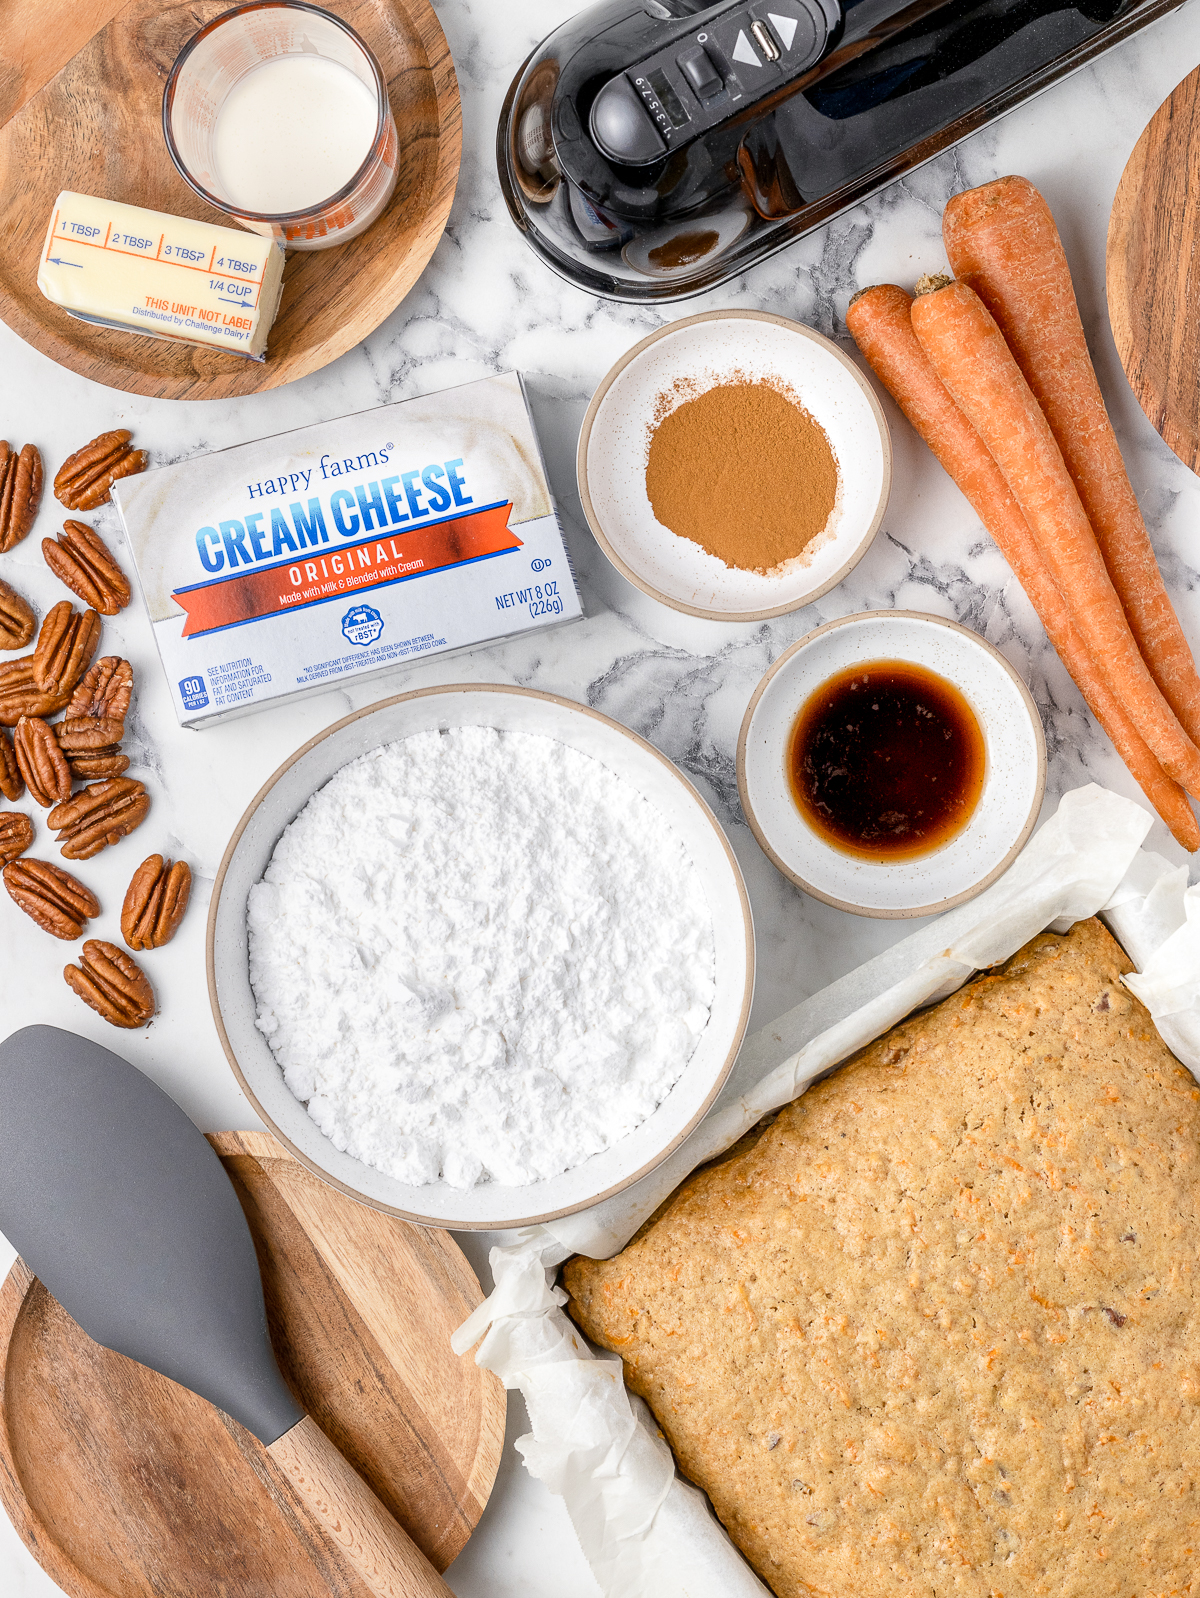 Ingredients. Cream cheese, unsalted butter, vanilla extract, powdered sugar, cinnamon, heavy whipping cream, and a fully baked carrot snack cake.